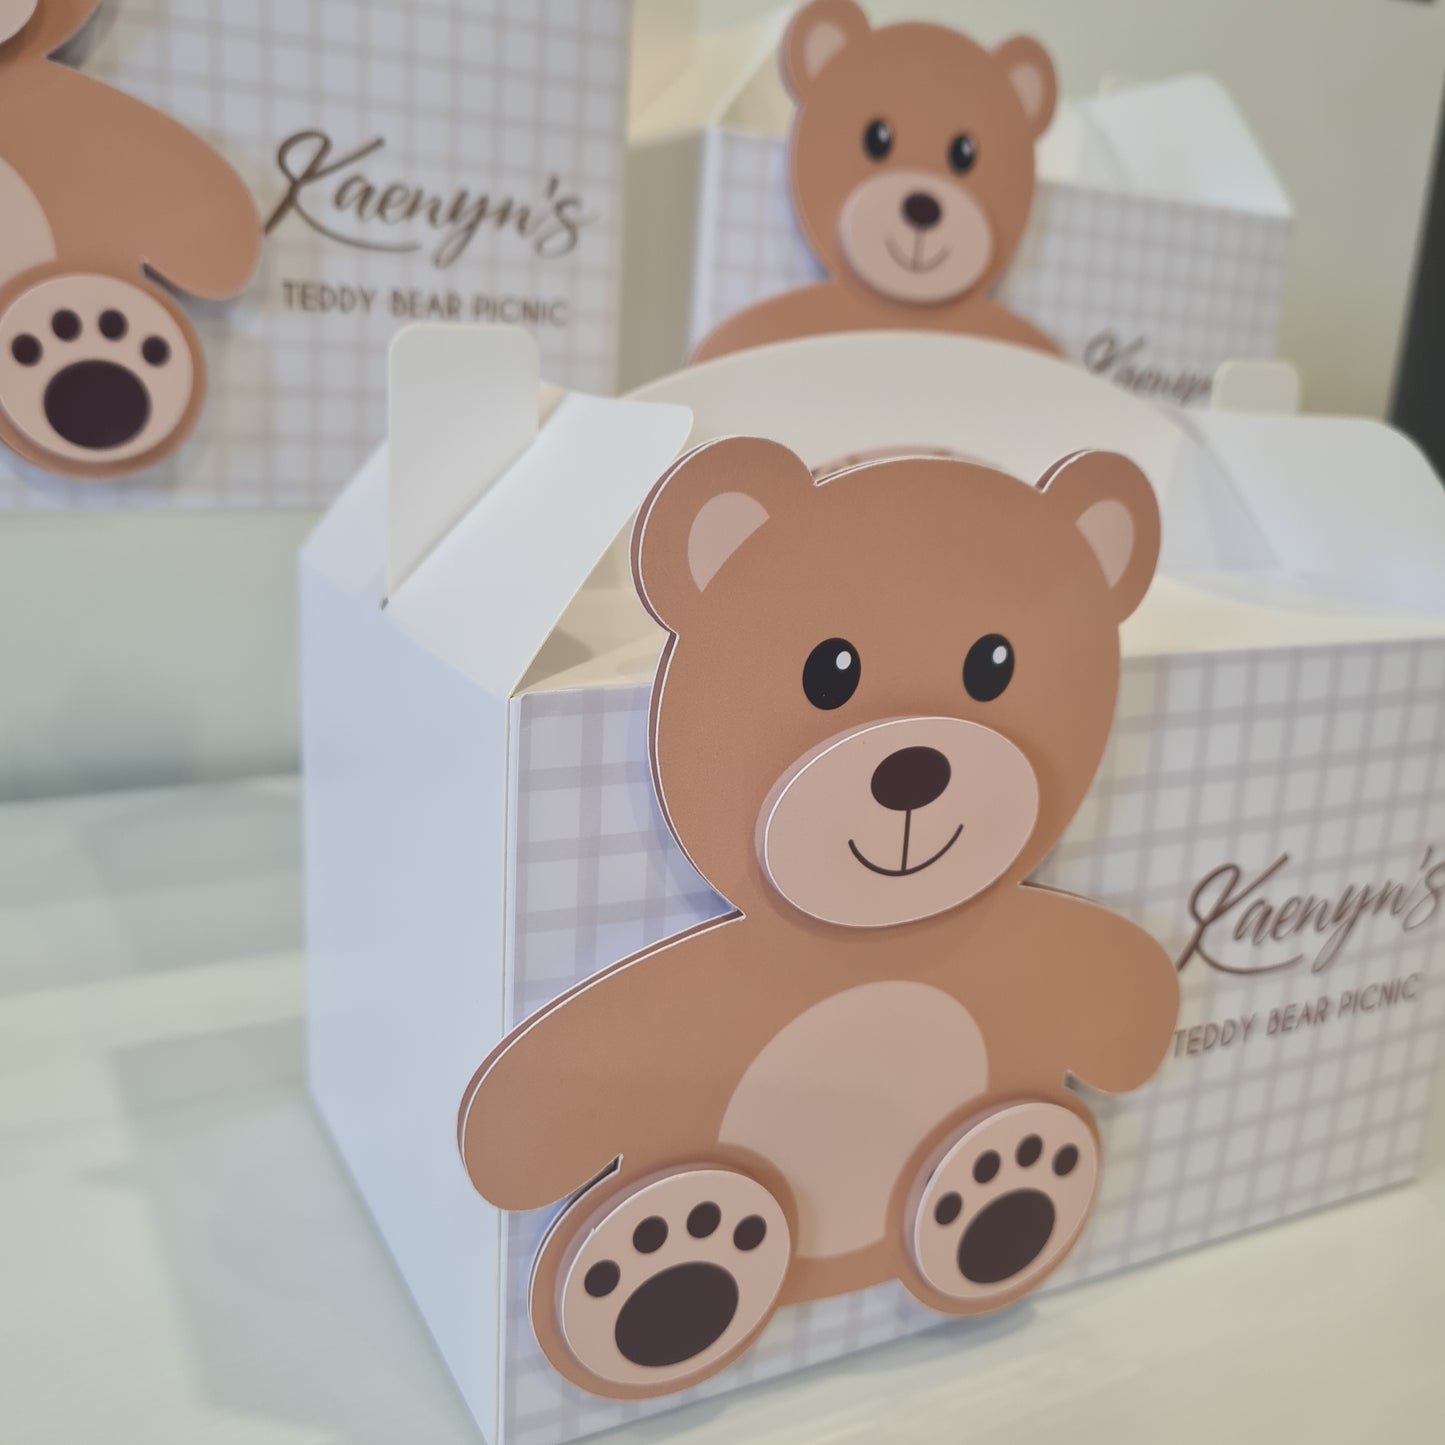 Teddy Bear Picnic Theme Party Box Birthday Party Favours